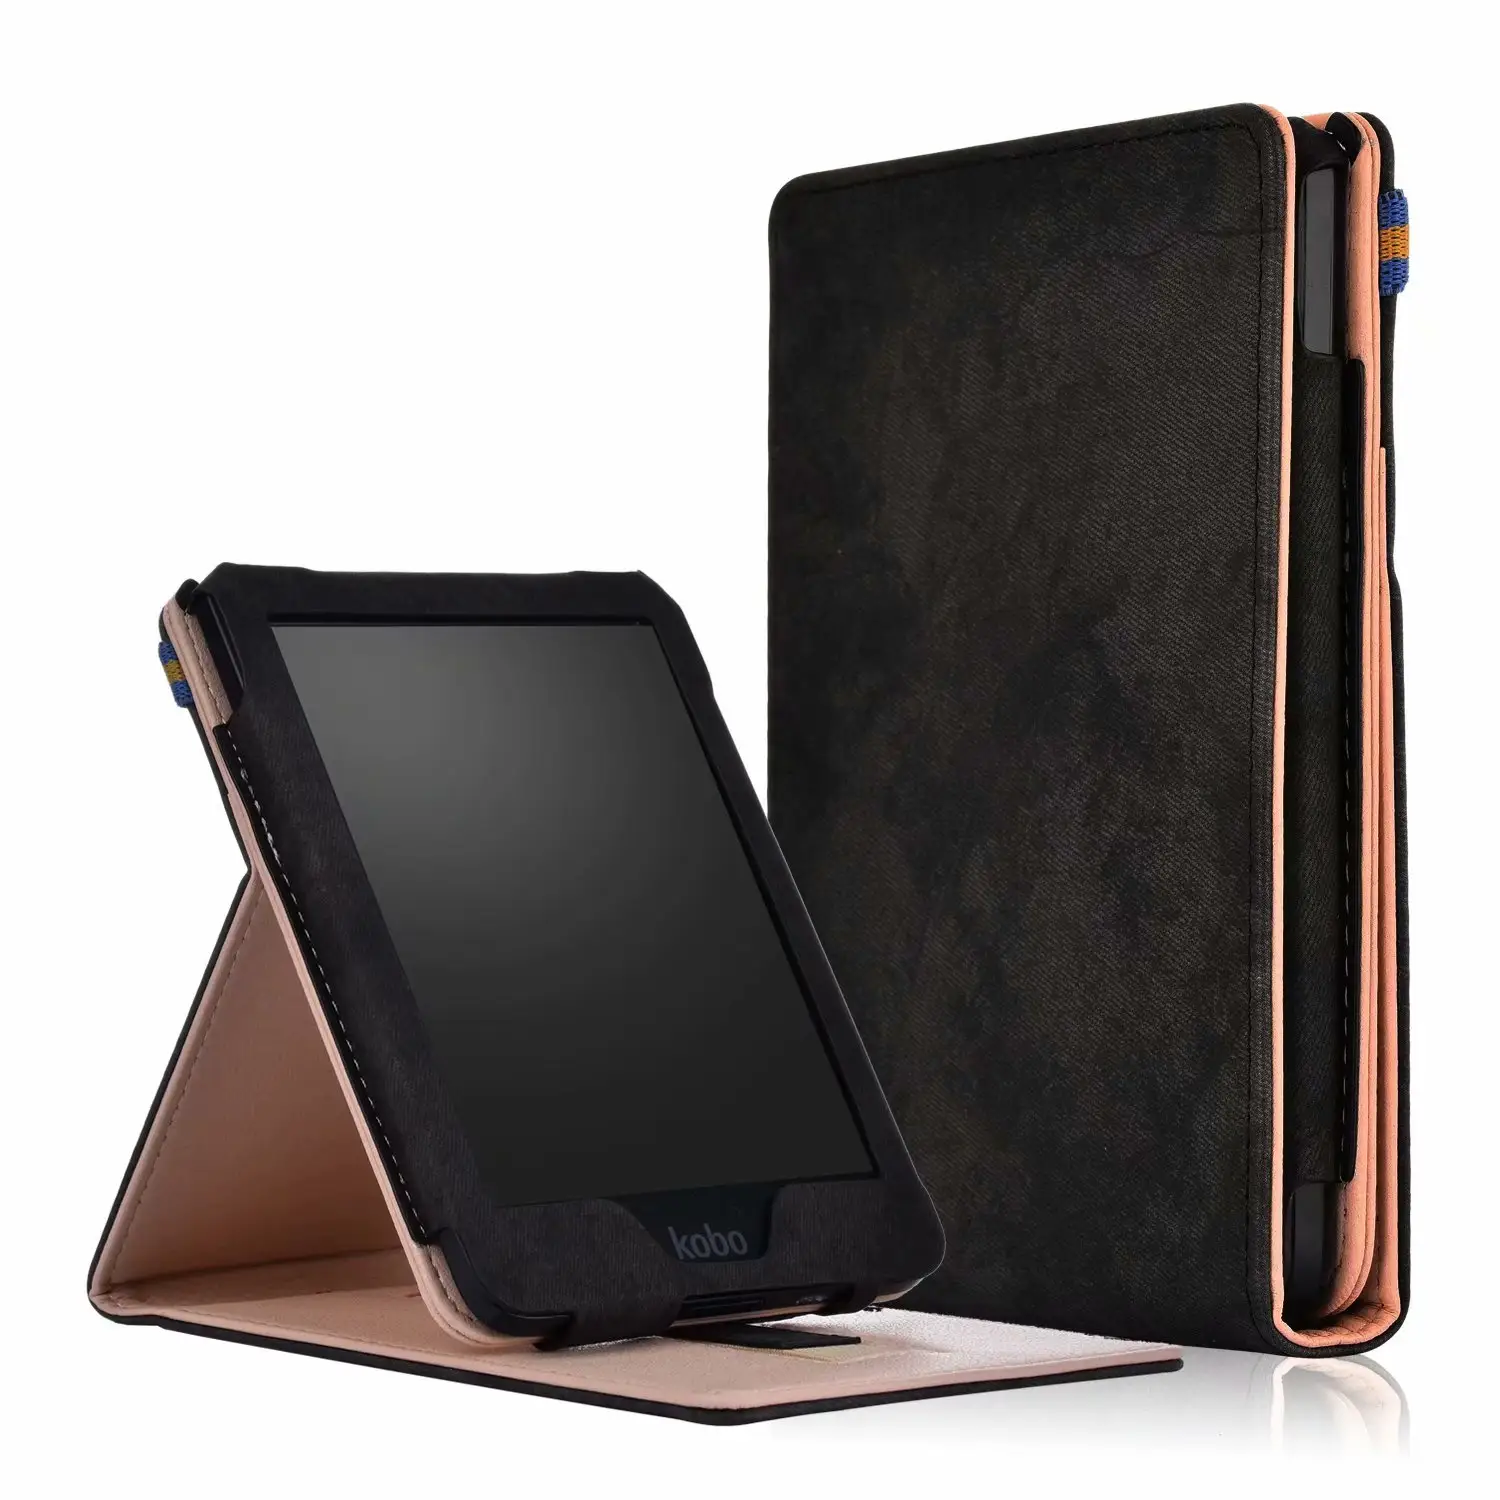 Luxury Leather Case for Kobo Clara HD Tablet Full Protective Cover with Card Pocket Three Slot Stand Function